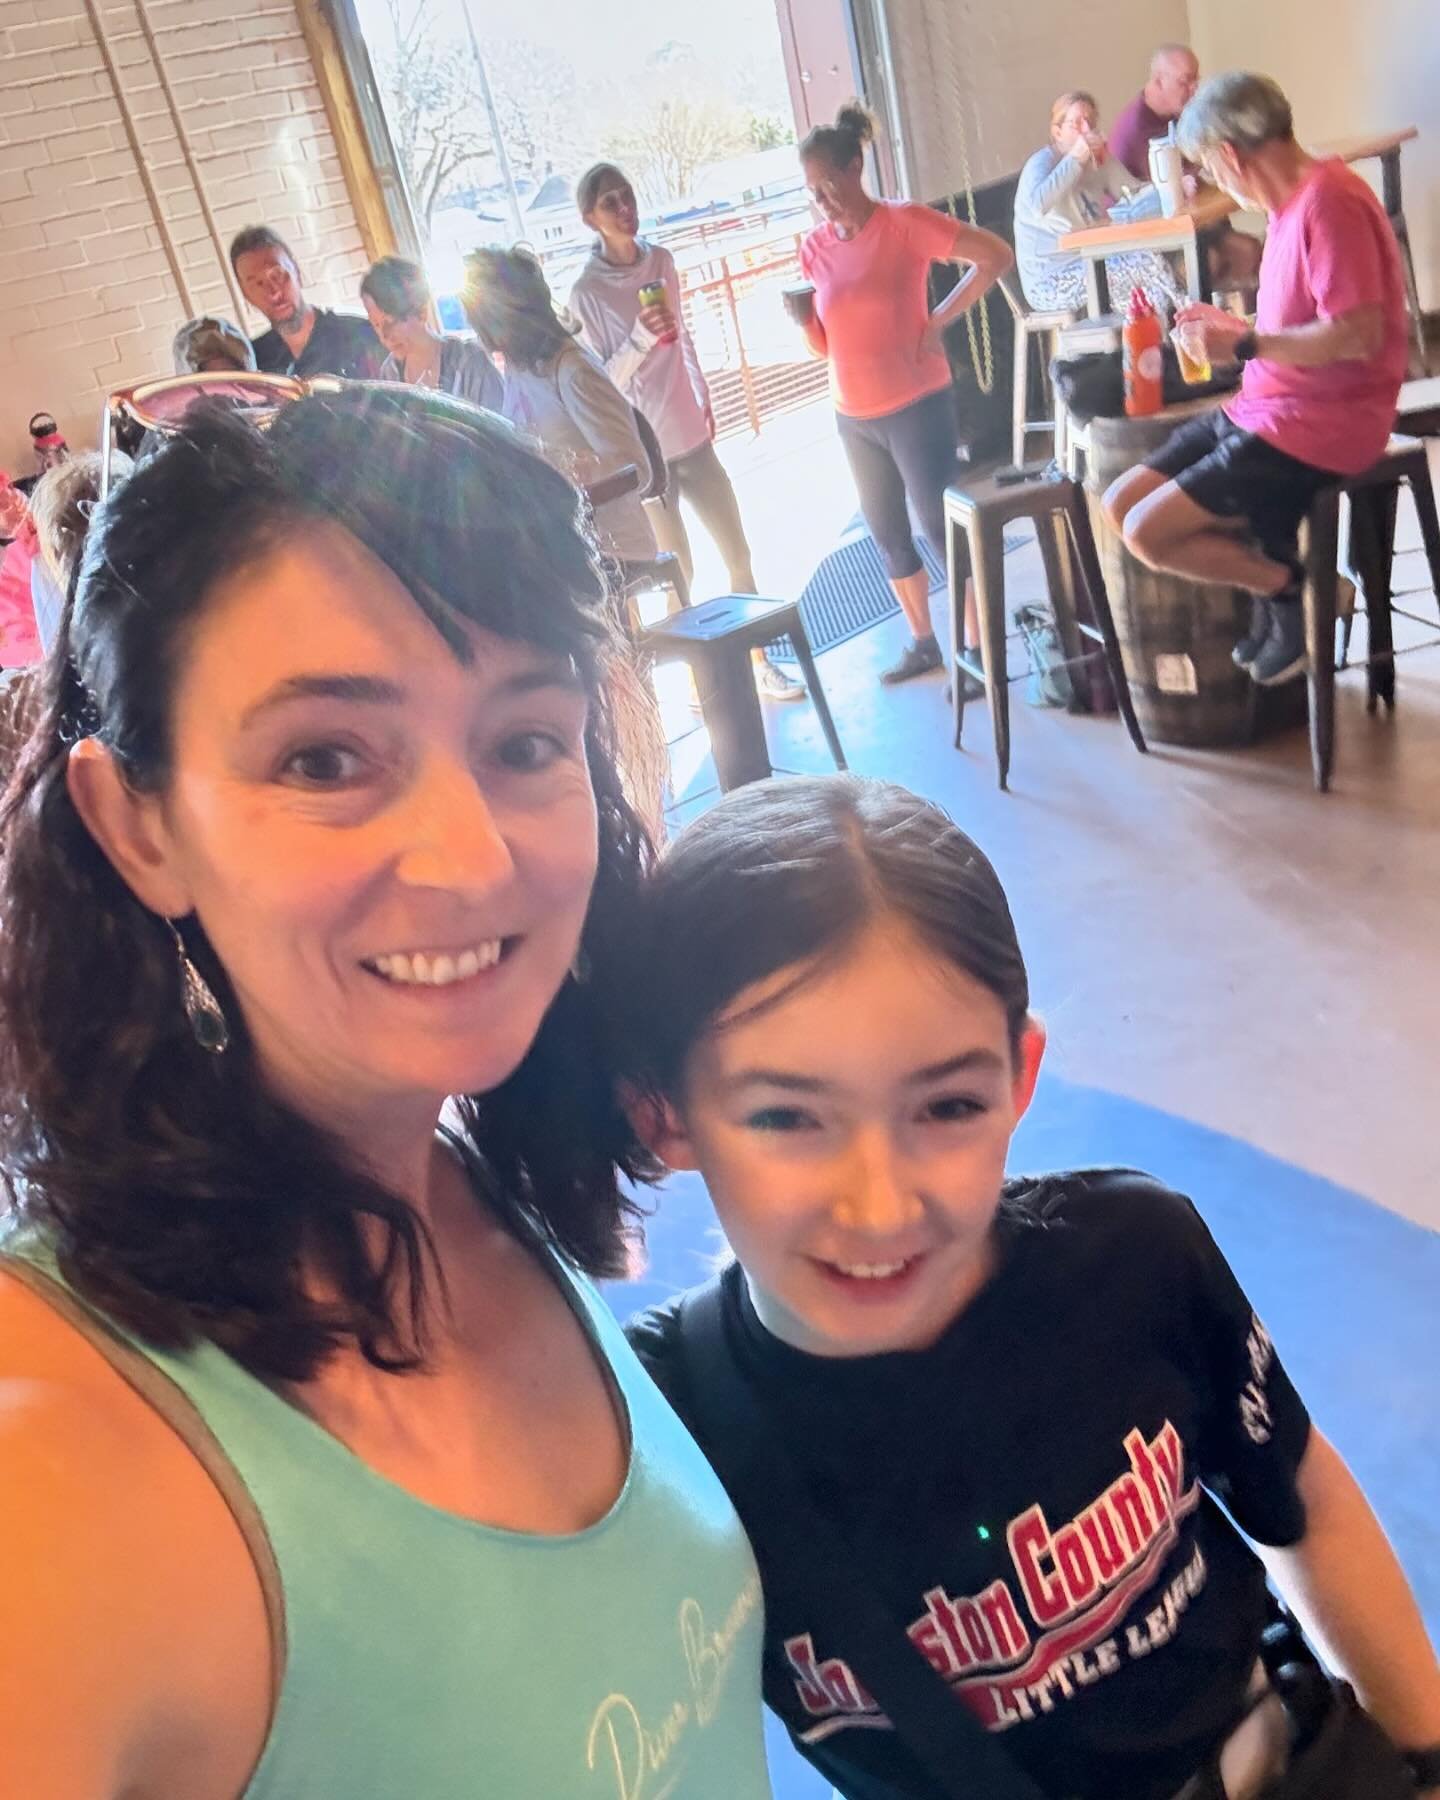 BOGO YOGA for Mother&rsquo;s Day at @deepriverbrewco 🤩😍

Bring your daughter or mother to yoga for free tomorrow only 5/12 at Deep River Mats + Taps at 12pm. 

Drop ins welcome. Kids accompanying are recommended 7 years and up. DM for questions!

#